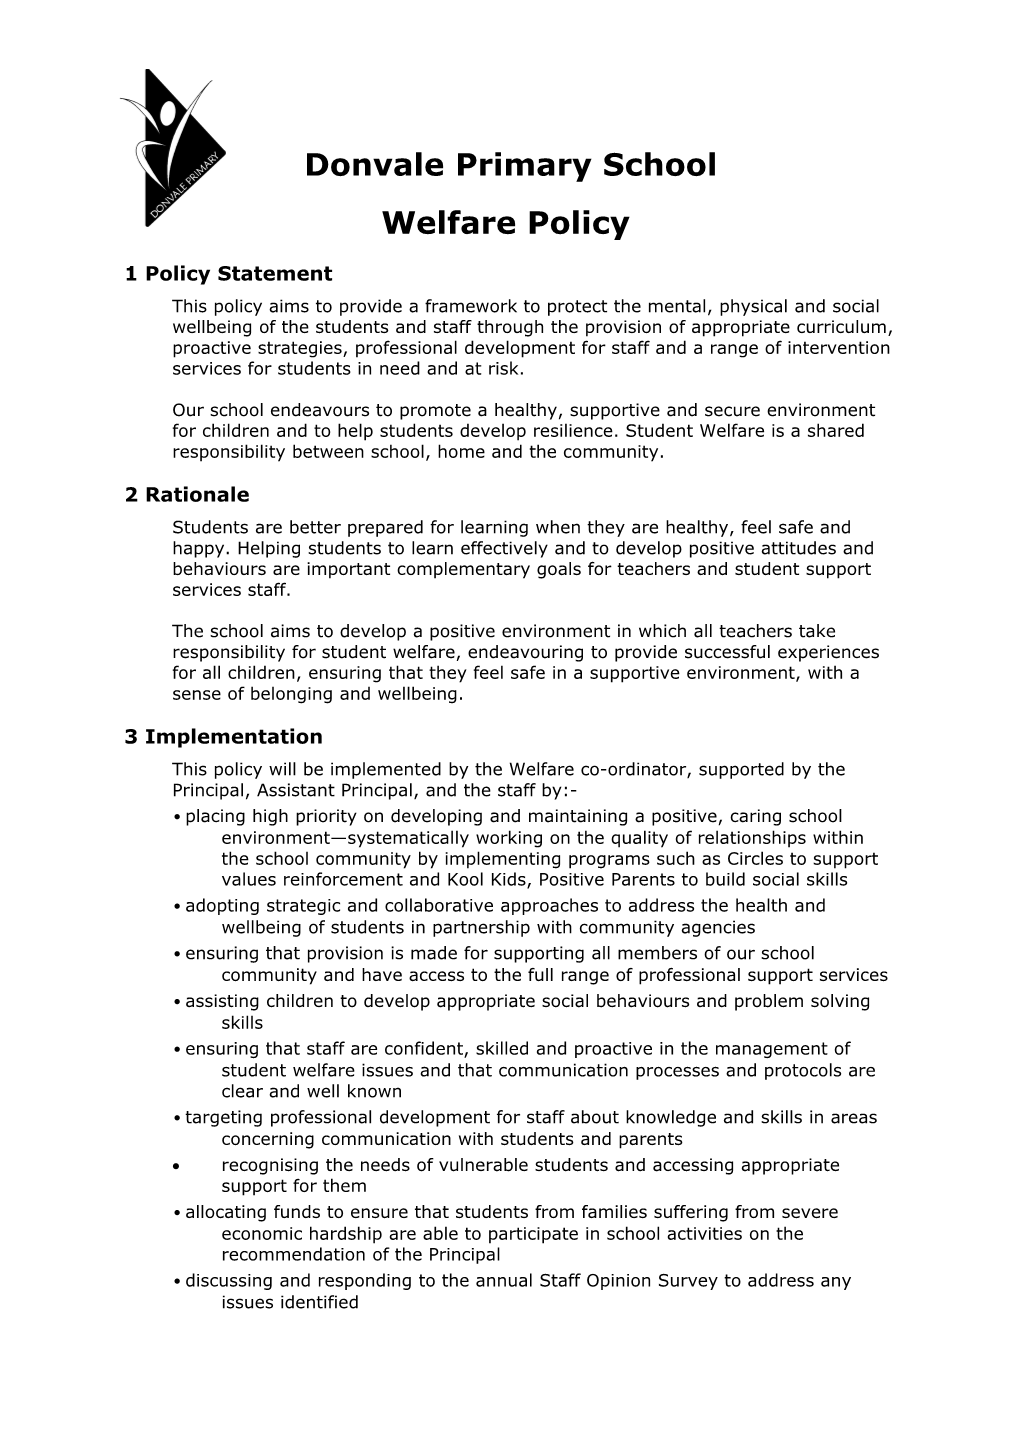 1 Policy Statement s2